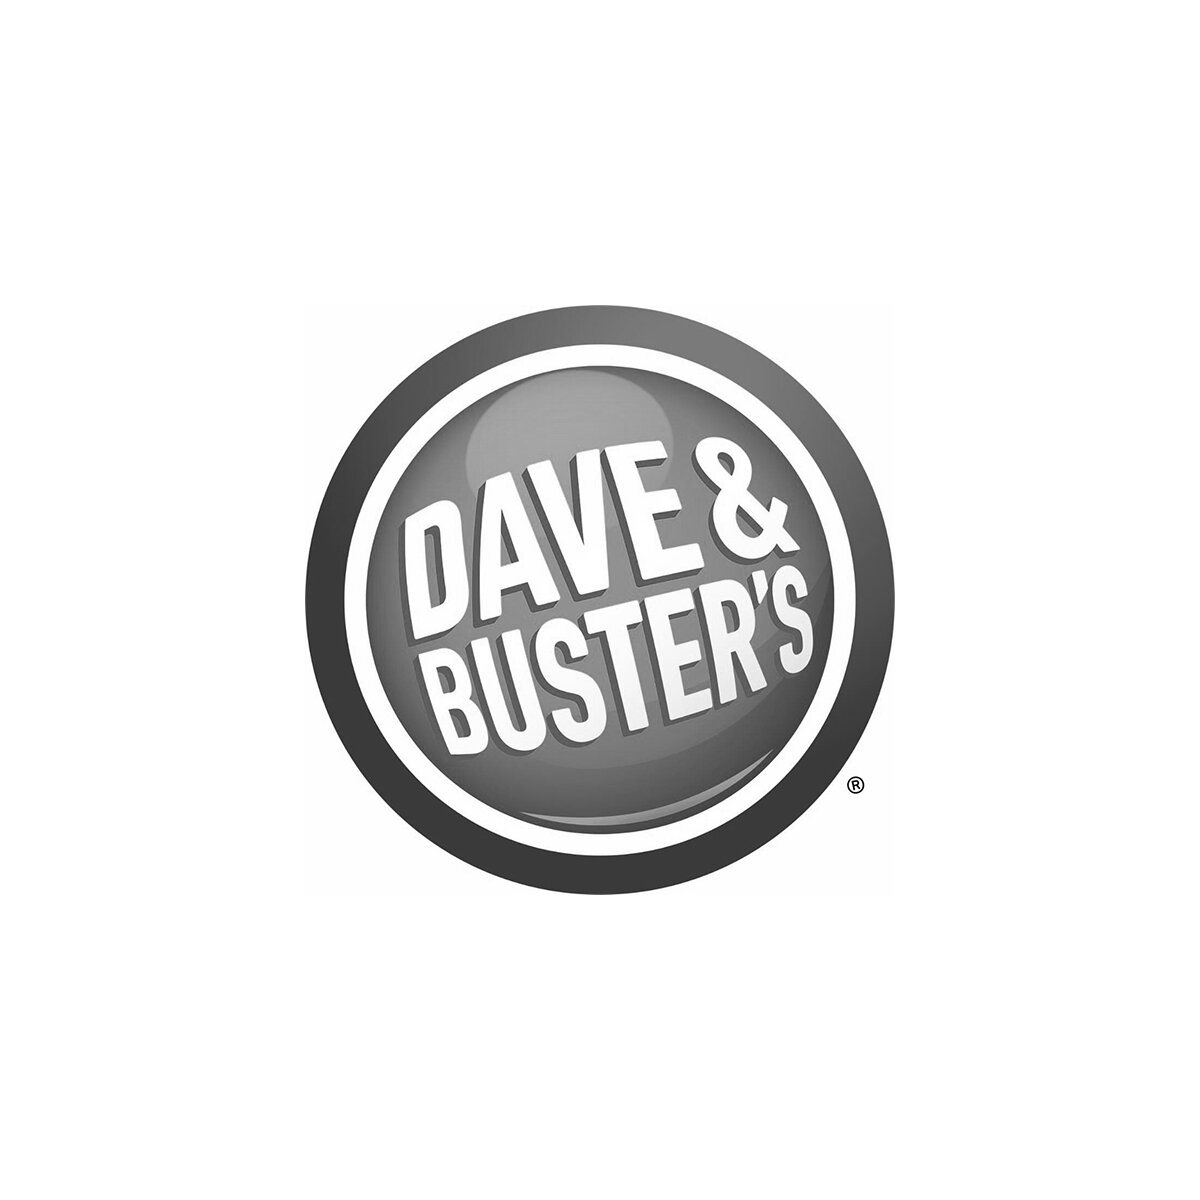 Dave-And-Busters.jpg